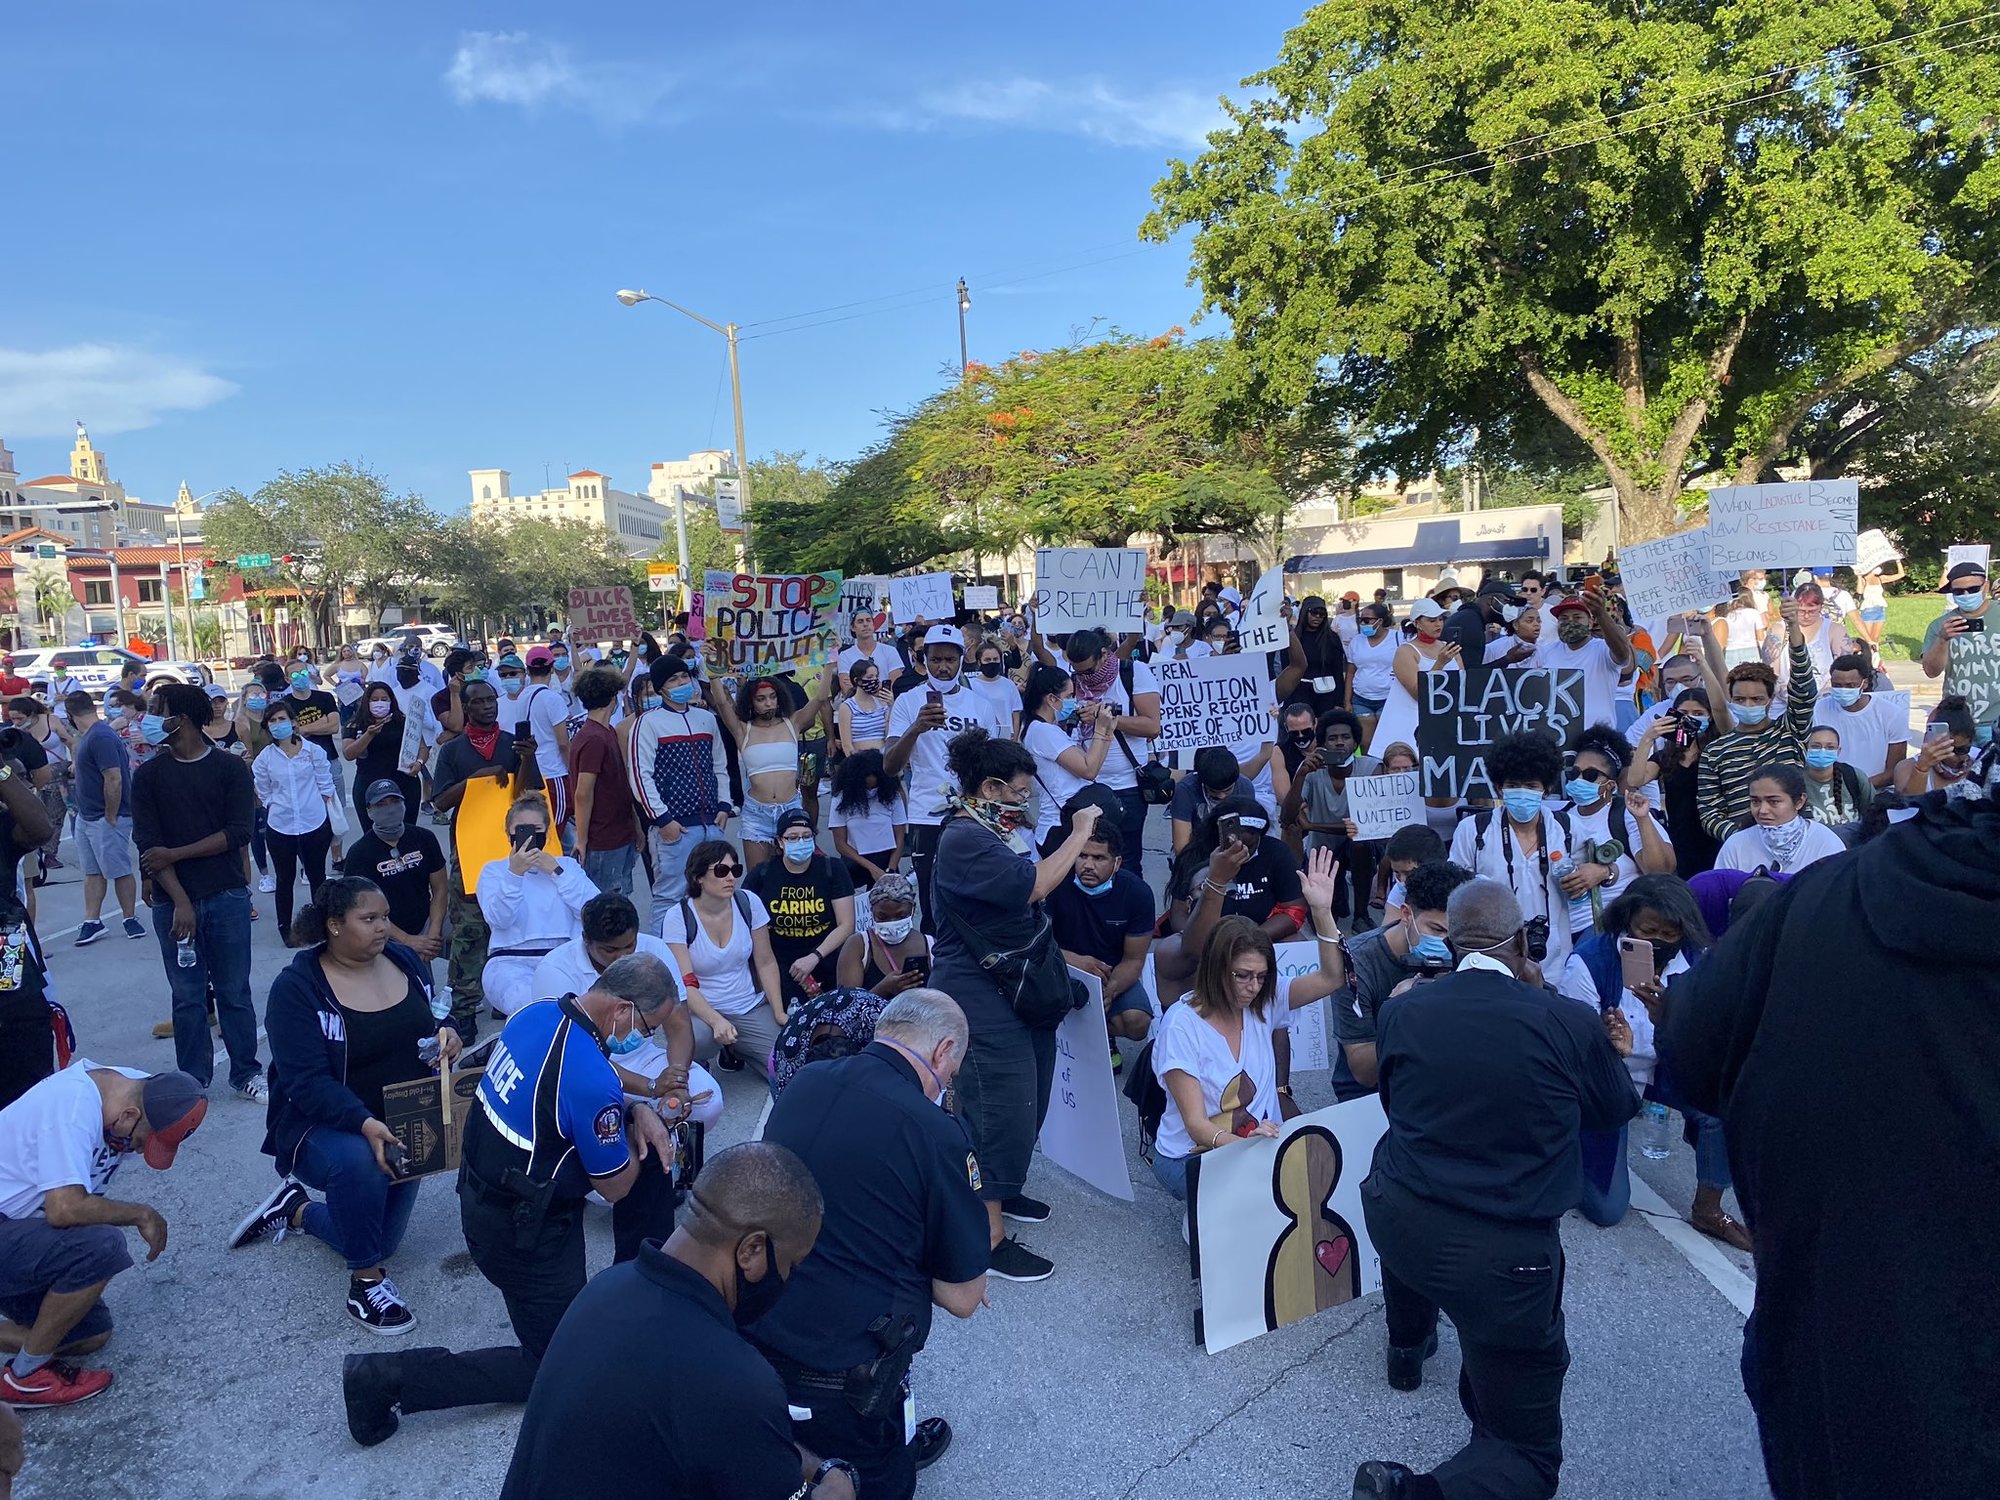 Demonstrators and police chiefs from Miami Dade County kneel and say a prayer. Photo courtesy of Twitter/Franklin White.